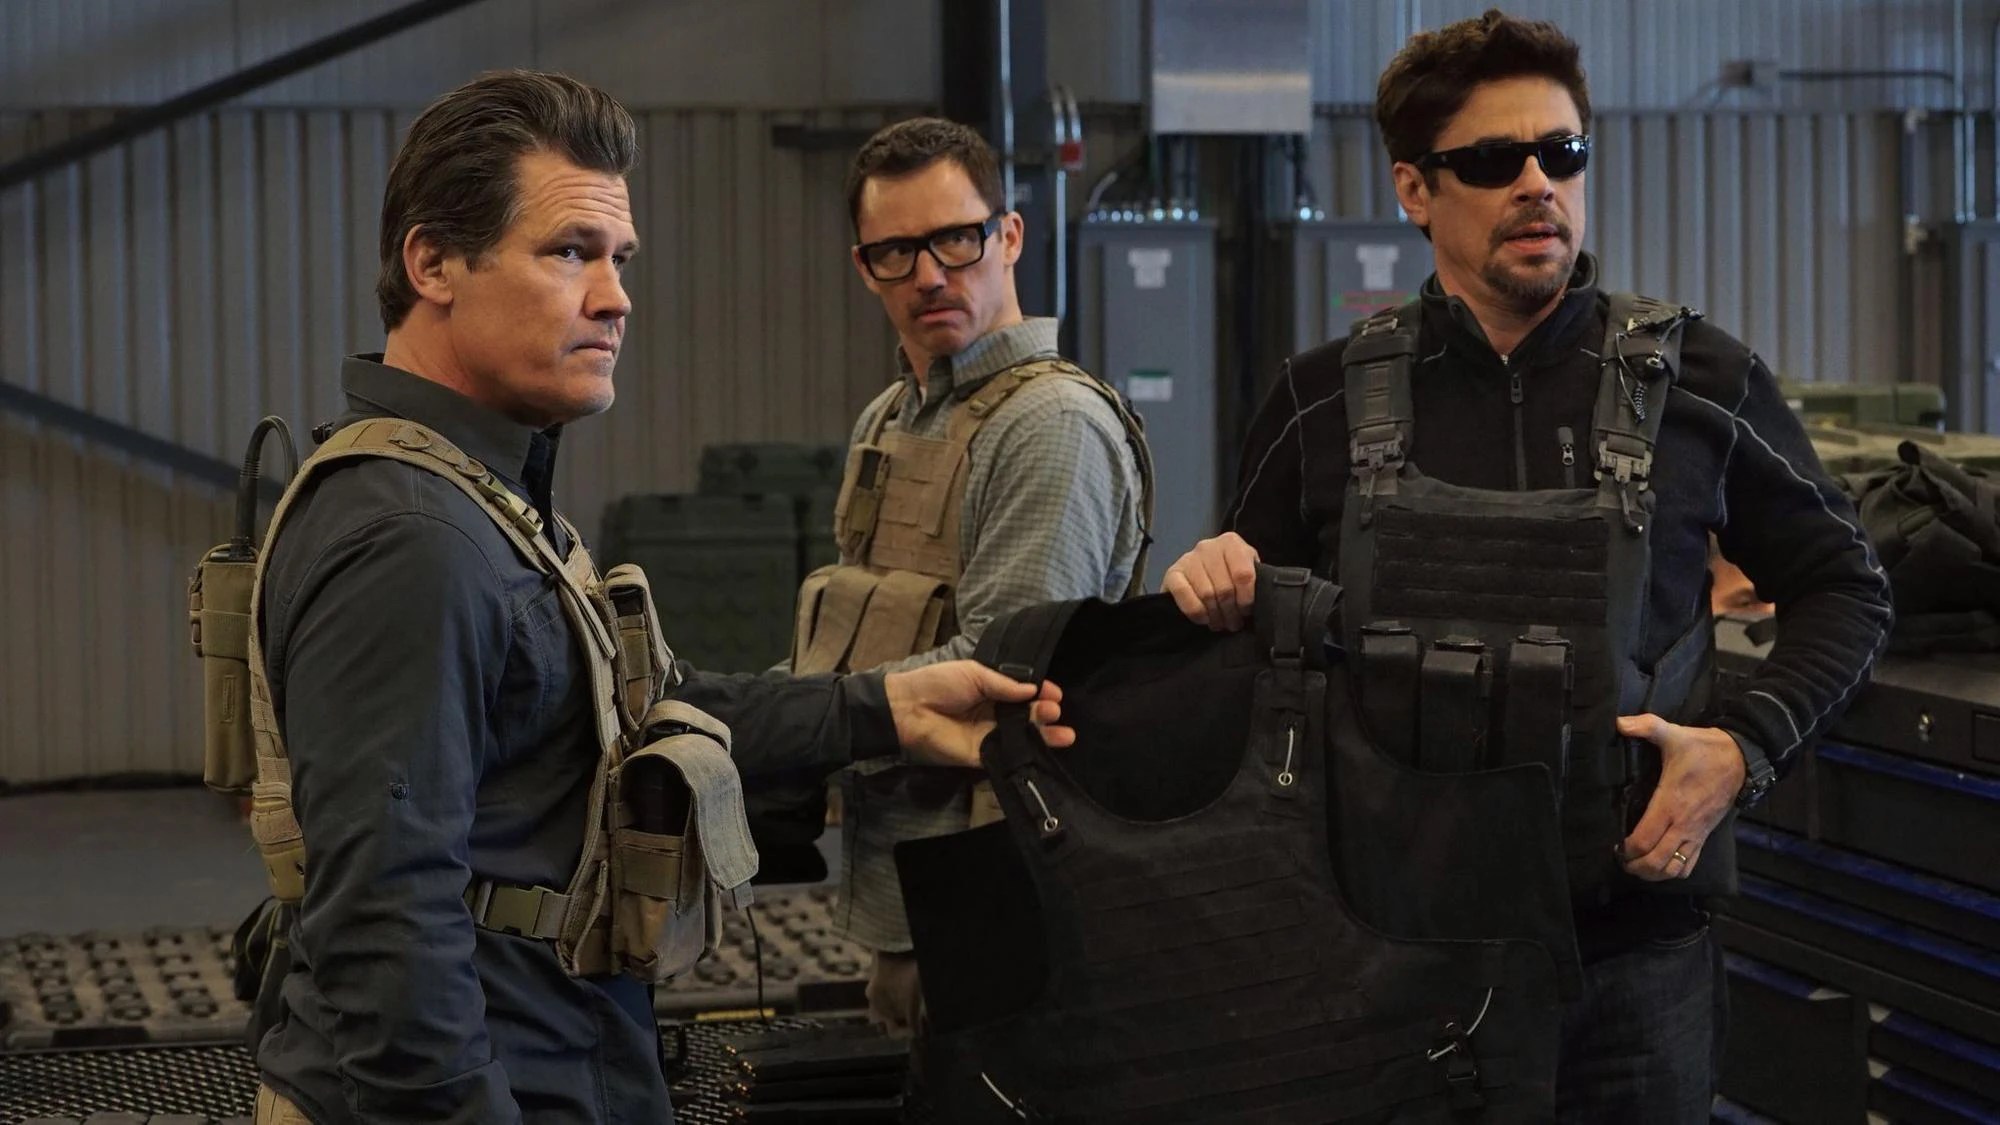 Is 'Sicario 2' Based On A True Story? The Movie Reflects The Real World